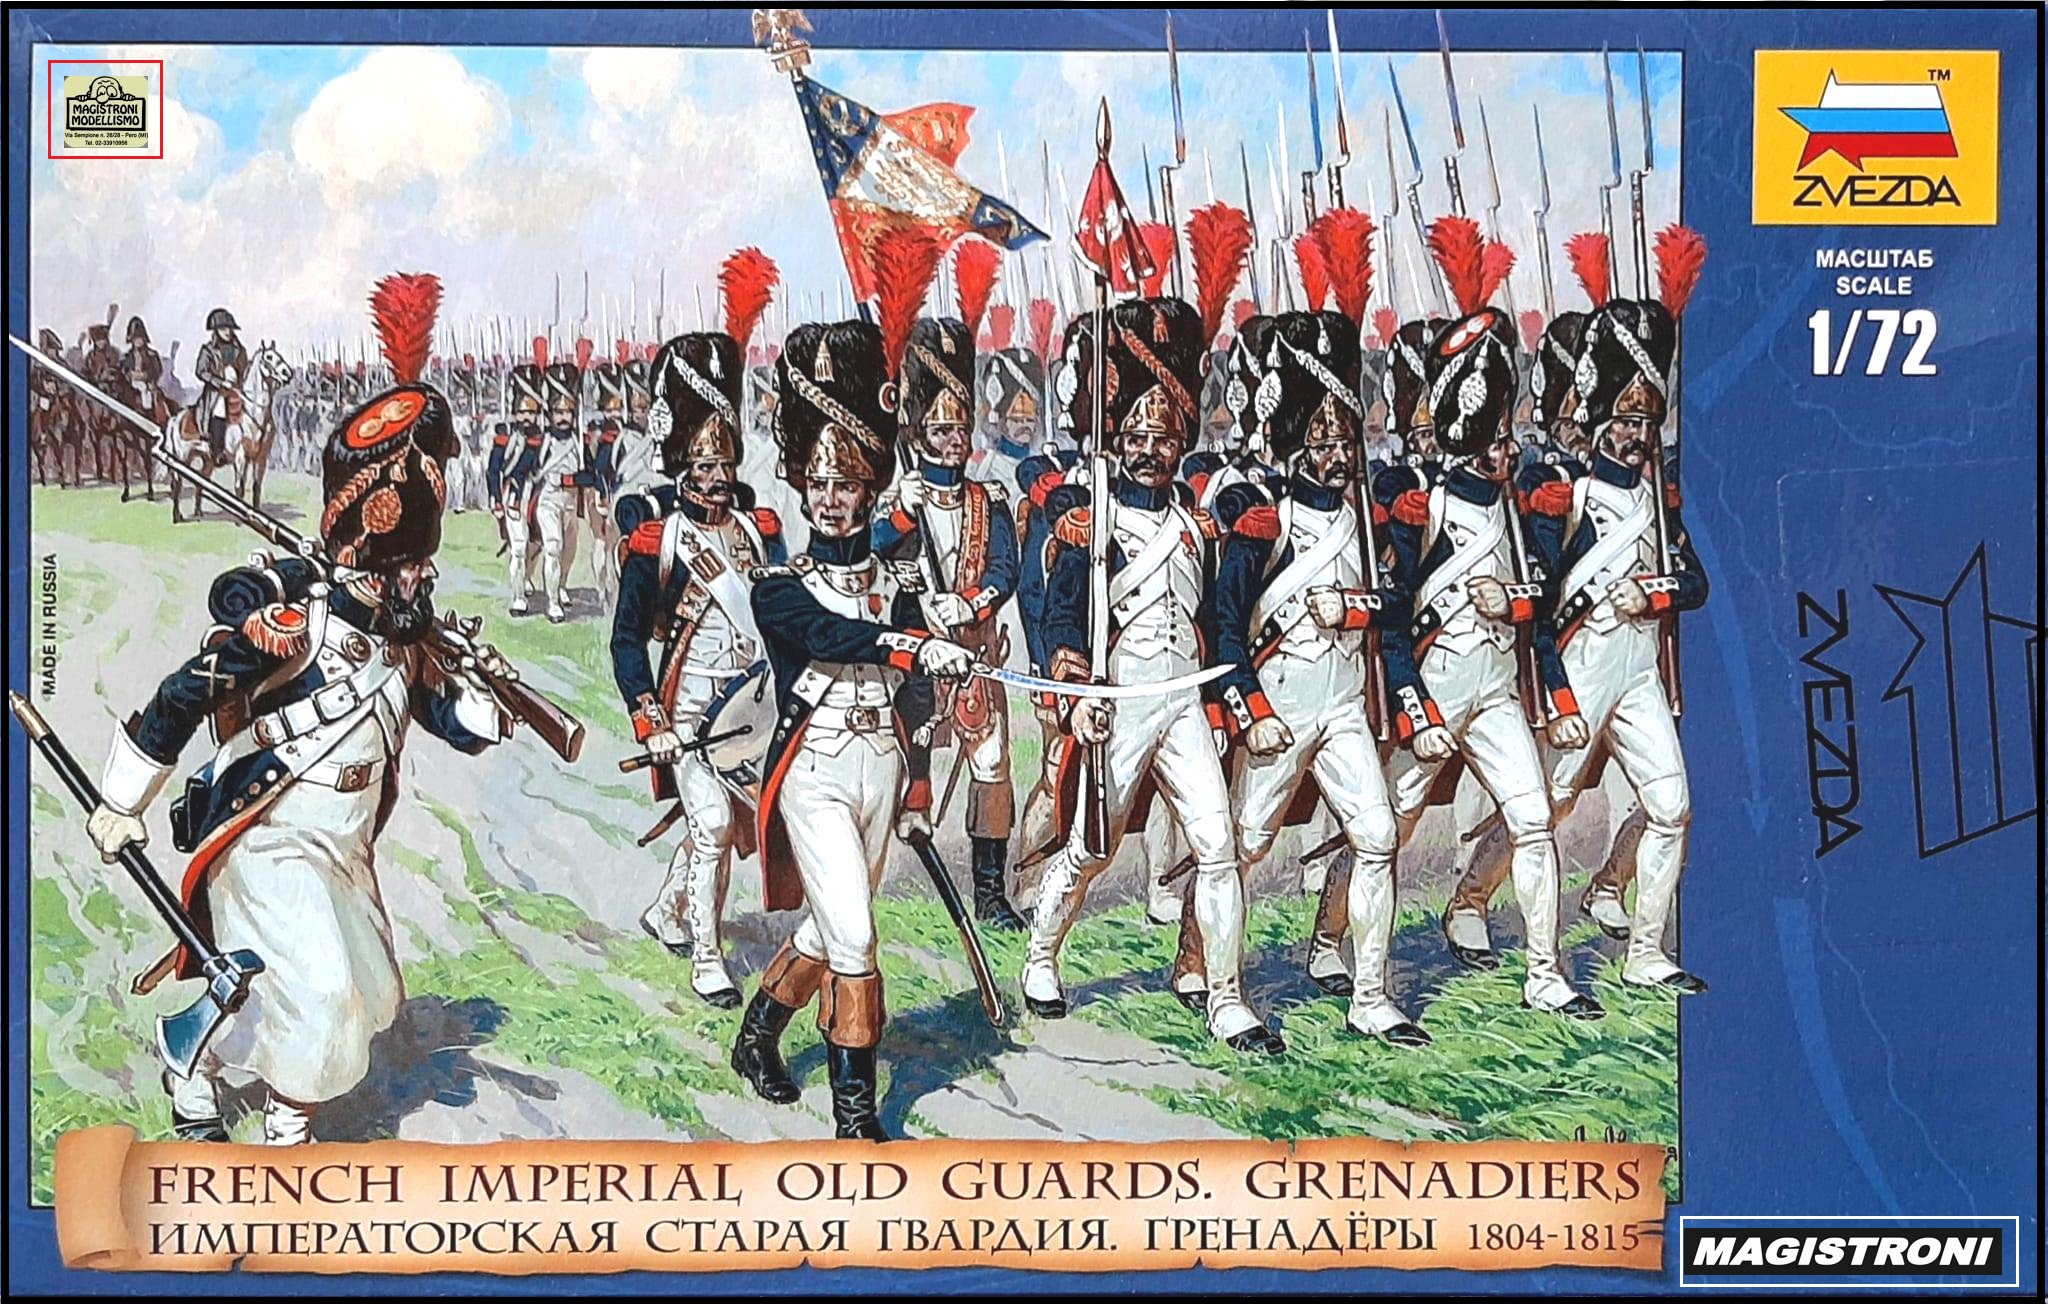 FRENCH IMPERIAL GUARDS GRENADIERS 1804-1815